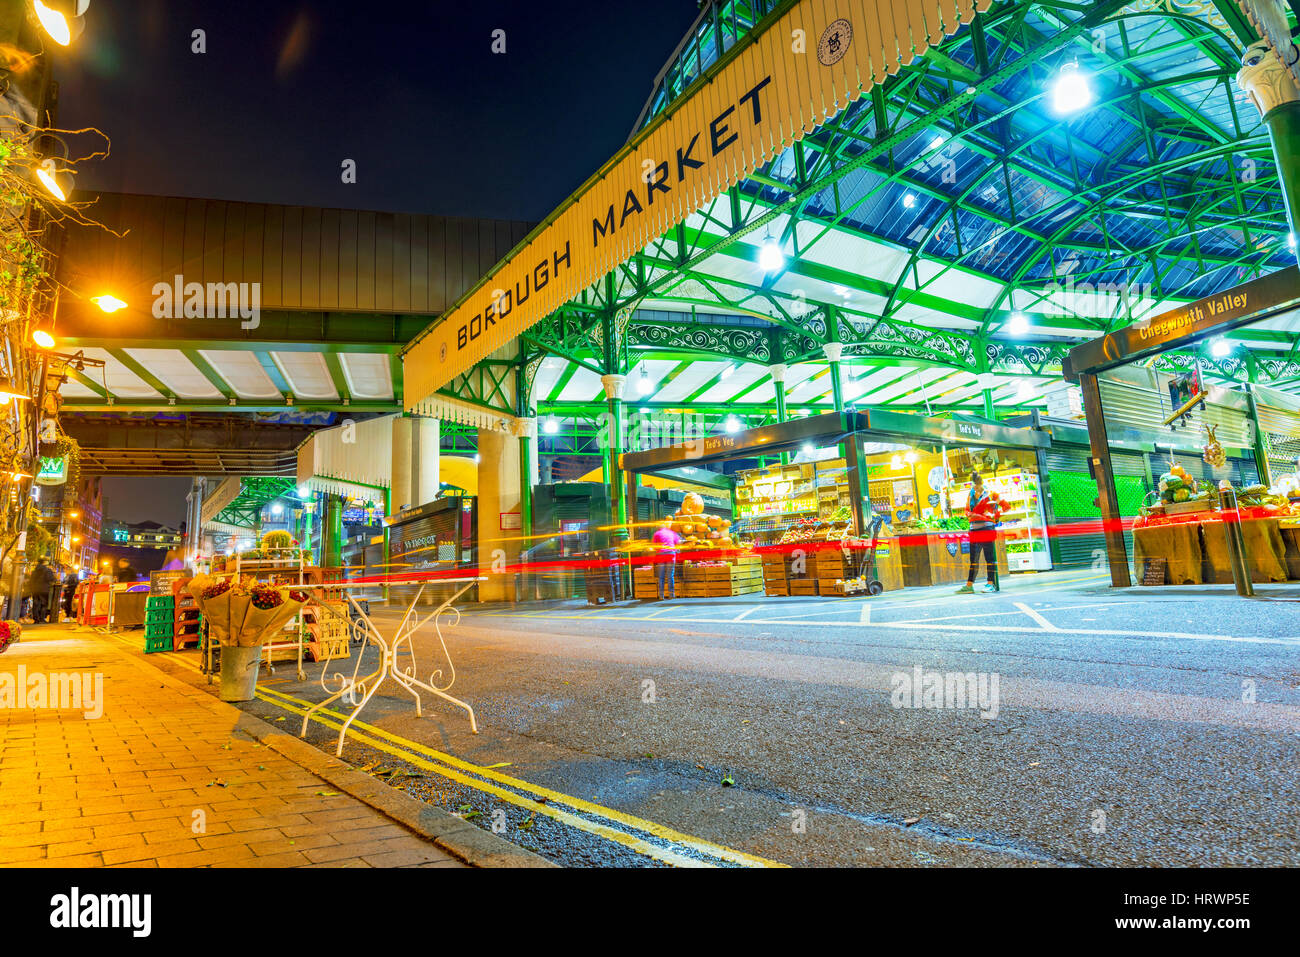 LONDON, UNITED KINGDOM - NOVEMBER 01: This is the entrance of Borough market which is a famous traditional English market in central London on Novembe Stock Photo